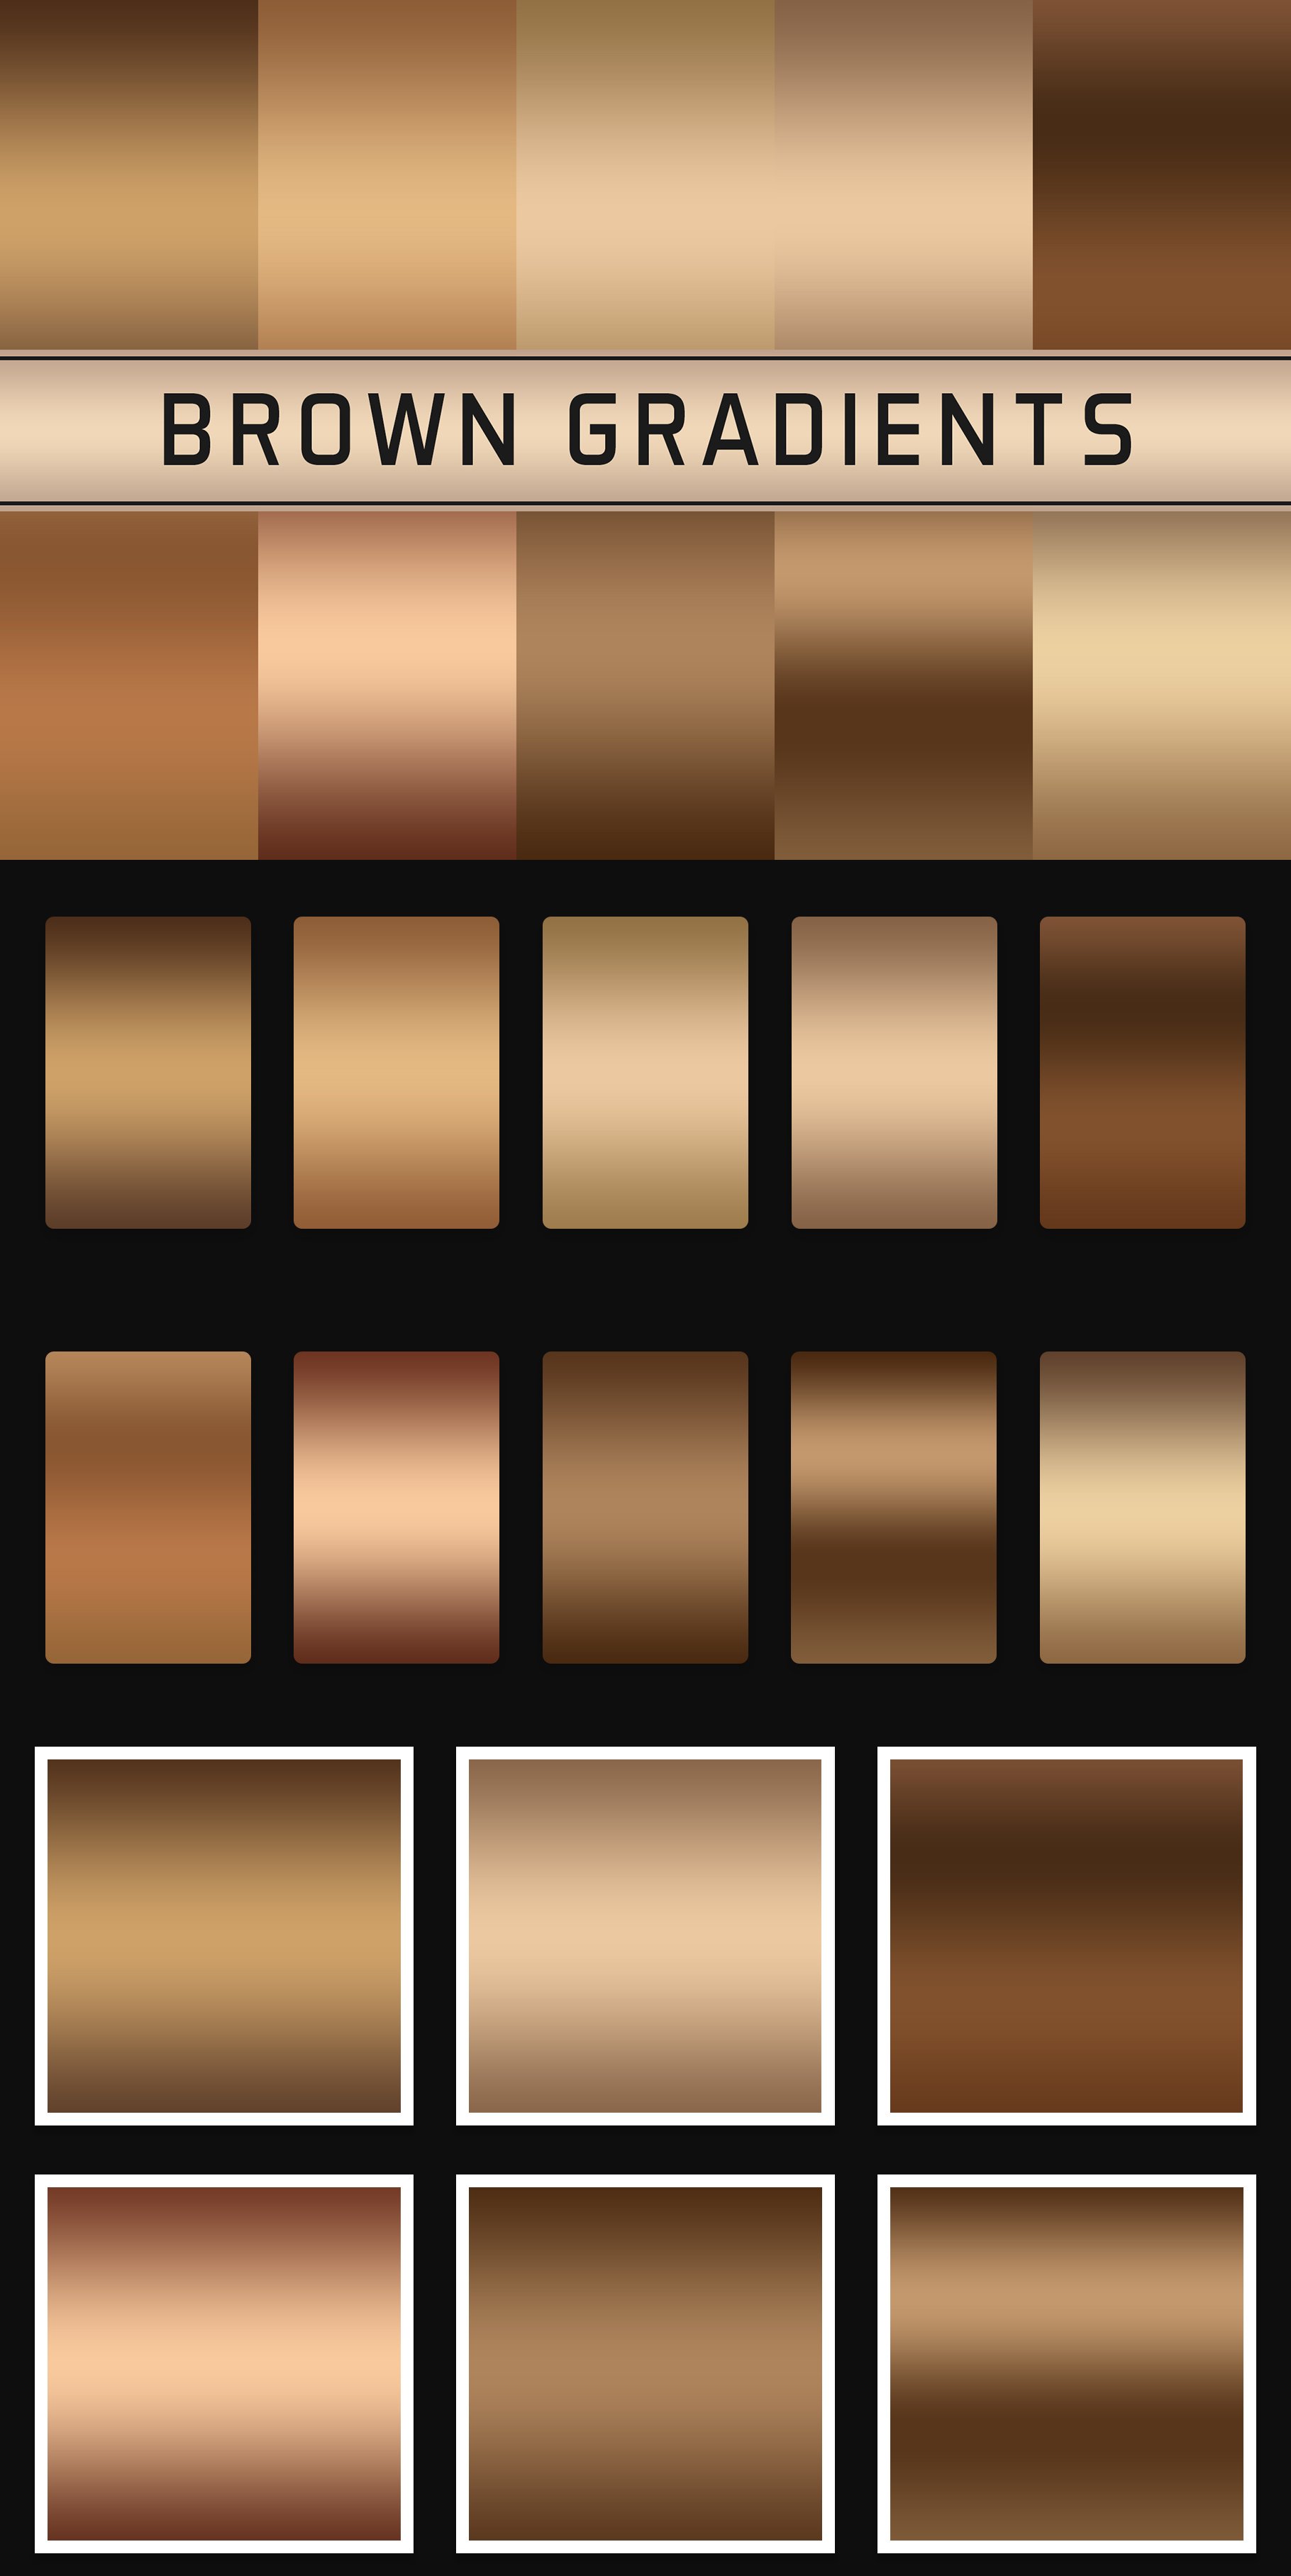 Brown Gradients cover image.